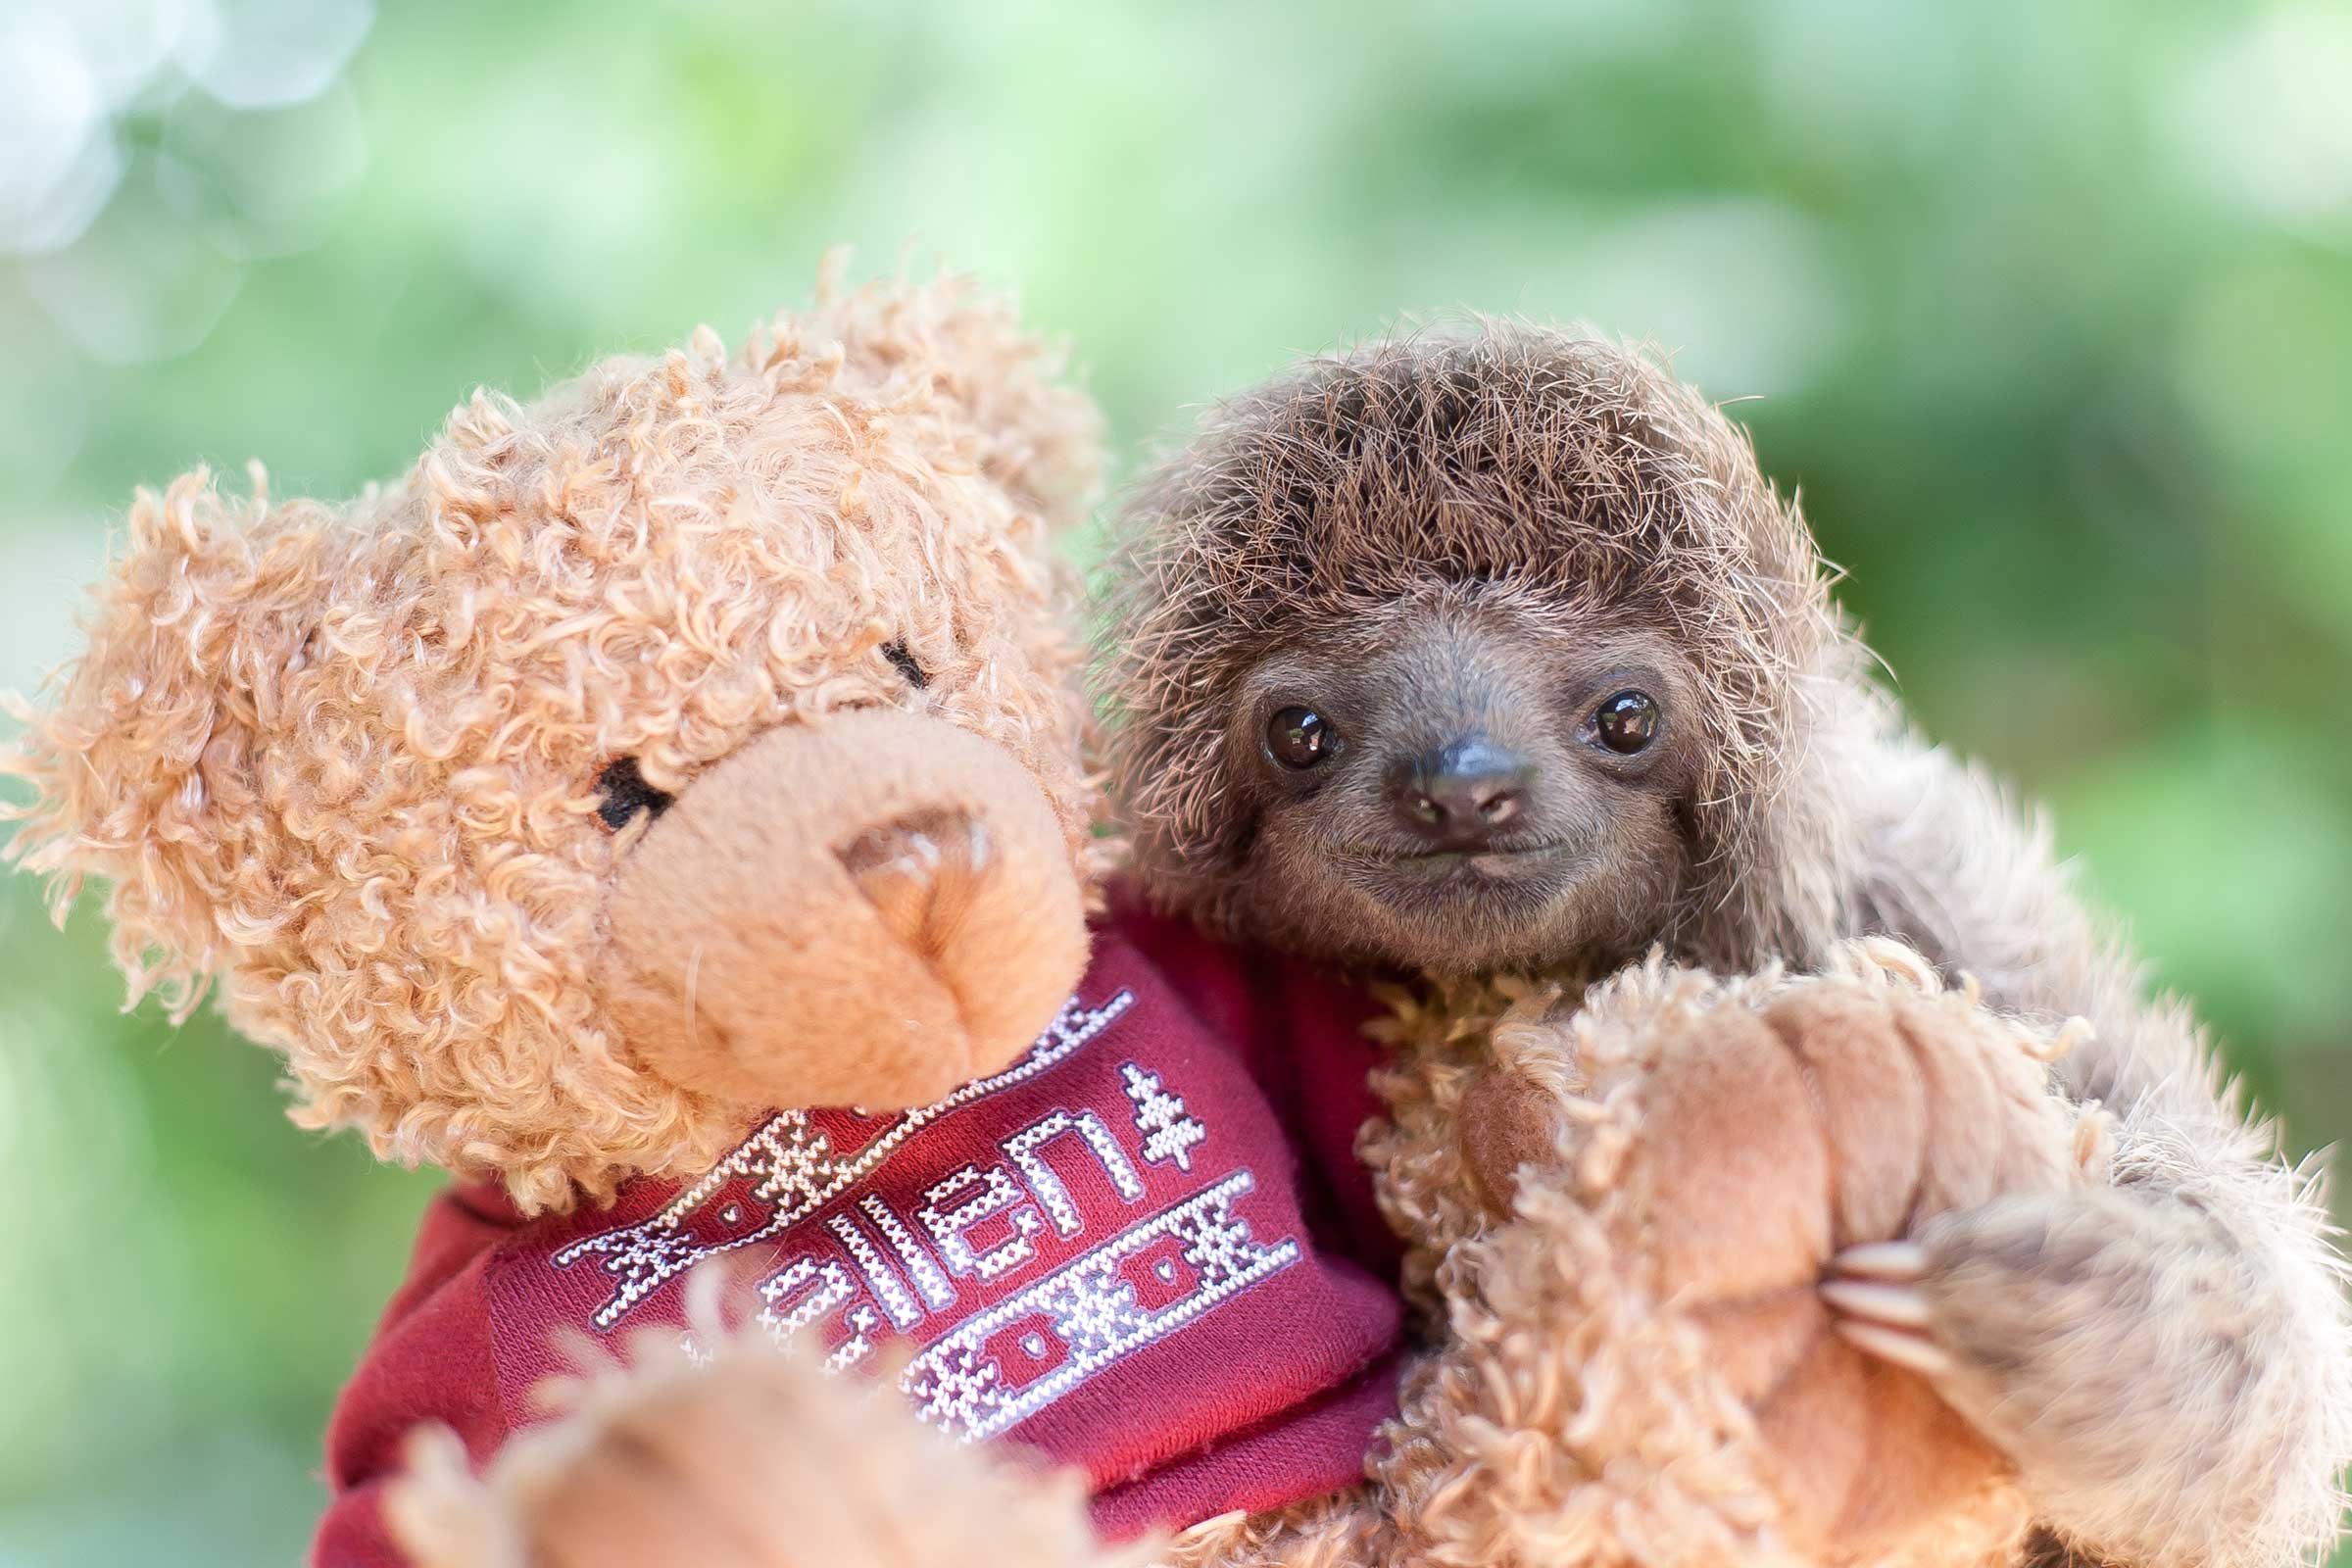 Cute Sloth Pictures: Adorable Photos of Sloths | Reader's Digest